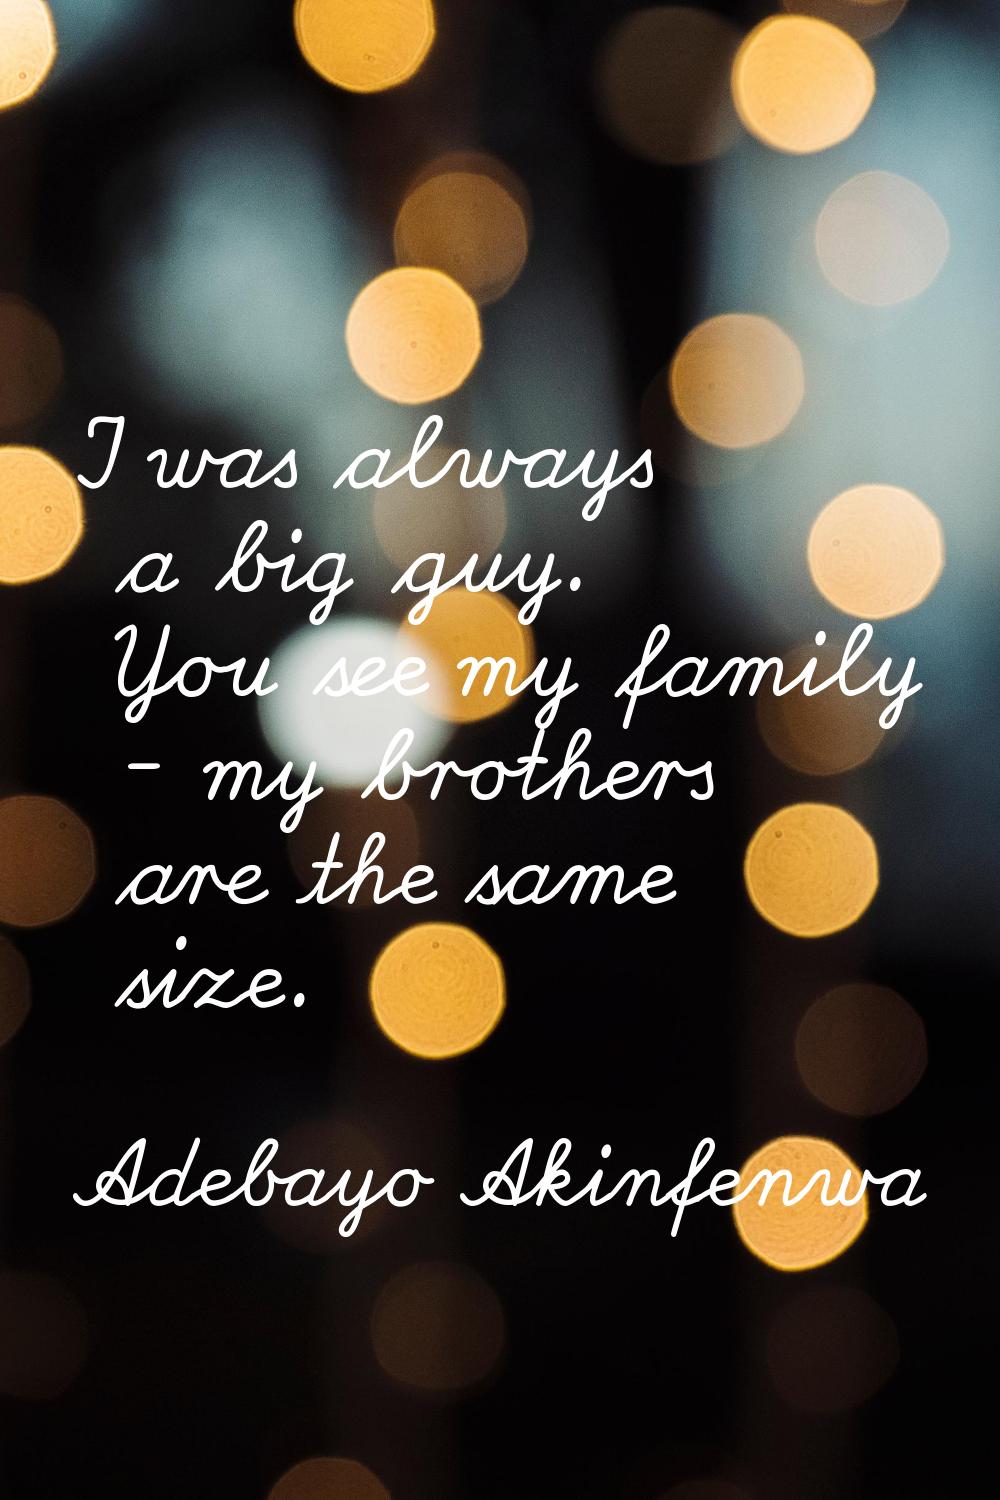 I was always a big guy. You see my family - my brothers are the same size.